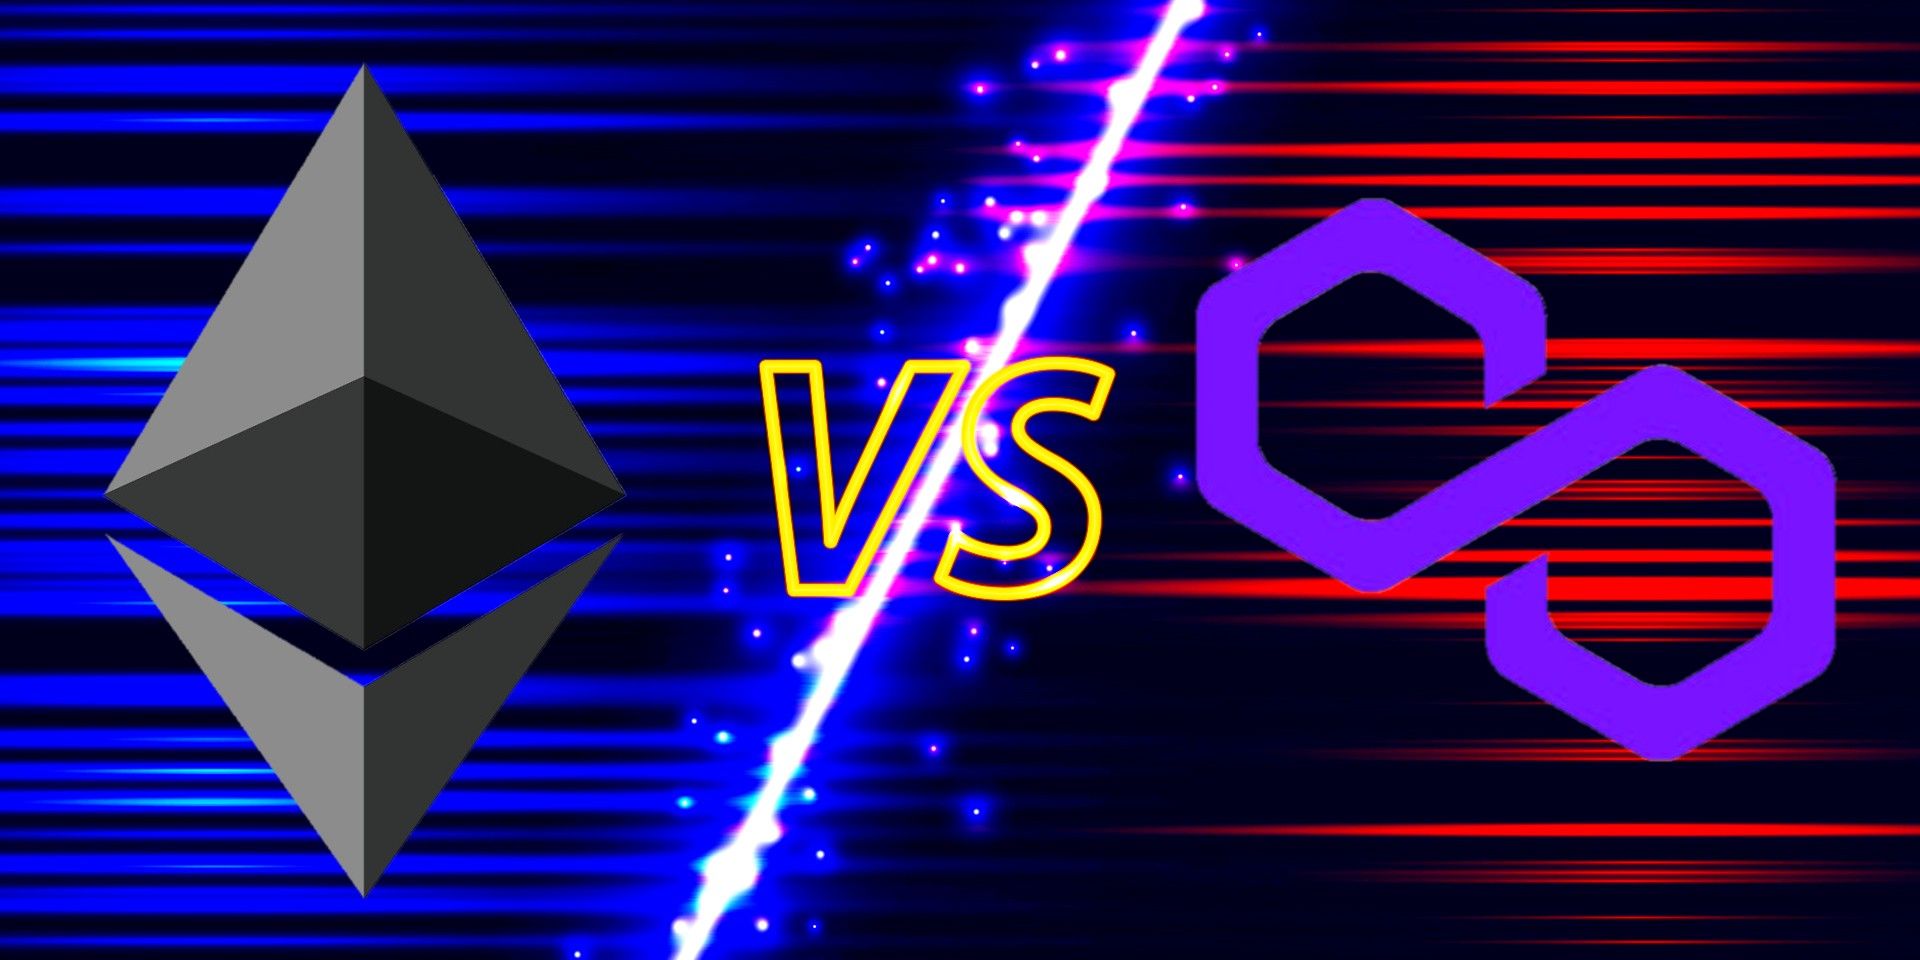 Ethereum logo with blue background on left, "VS" letters with bright energy line in center, Polygon logo with red background on right